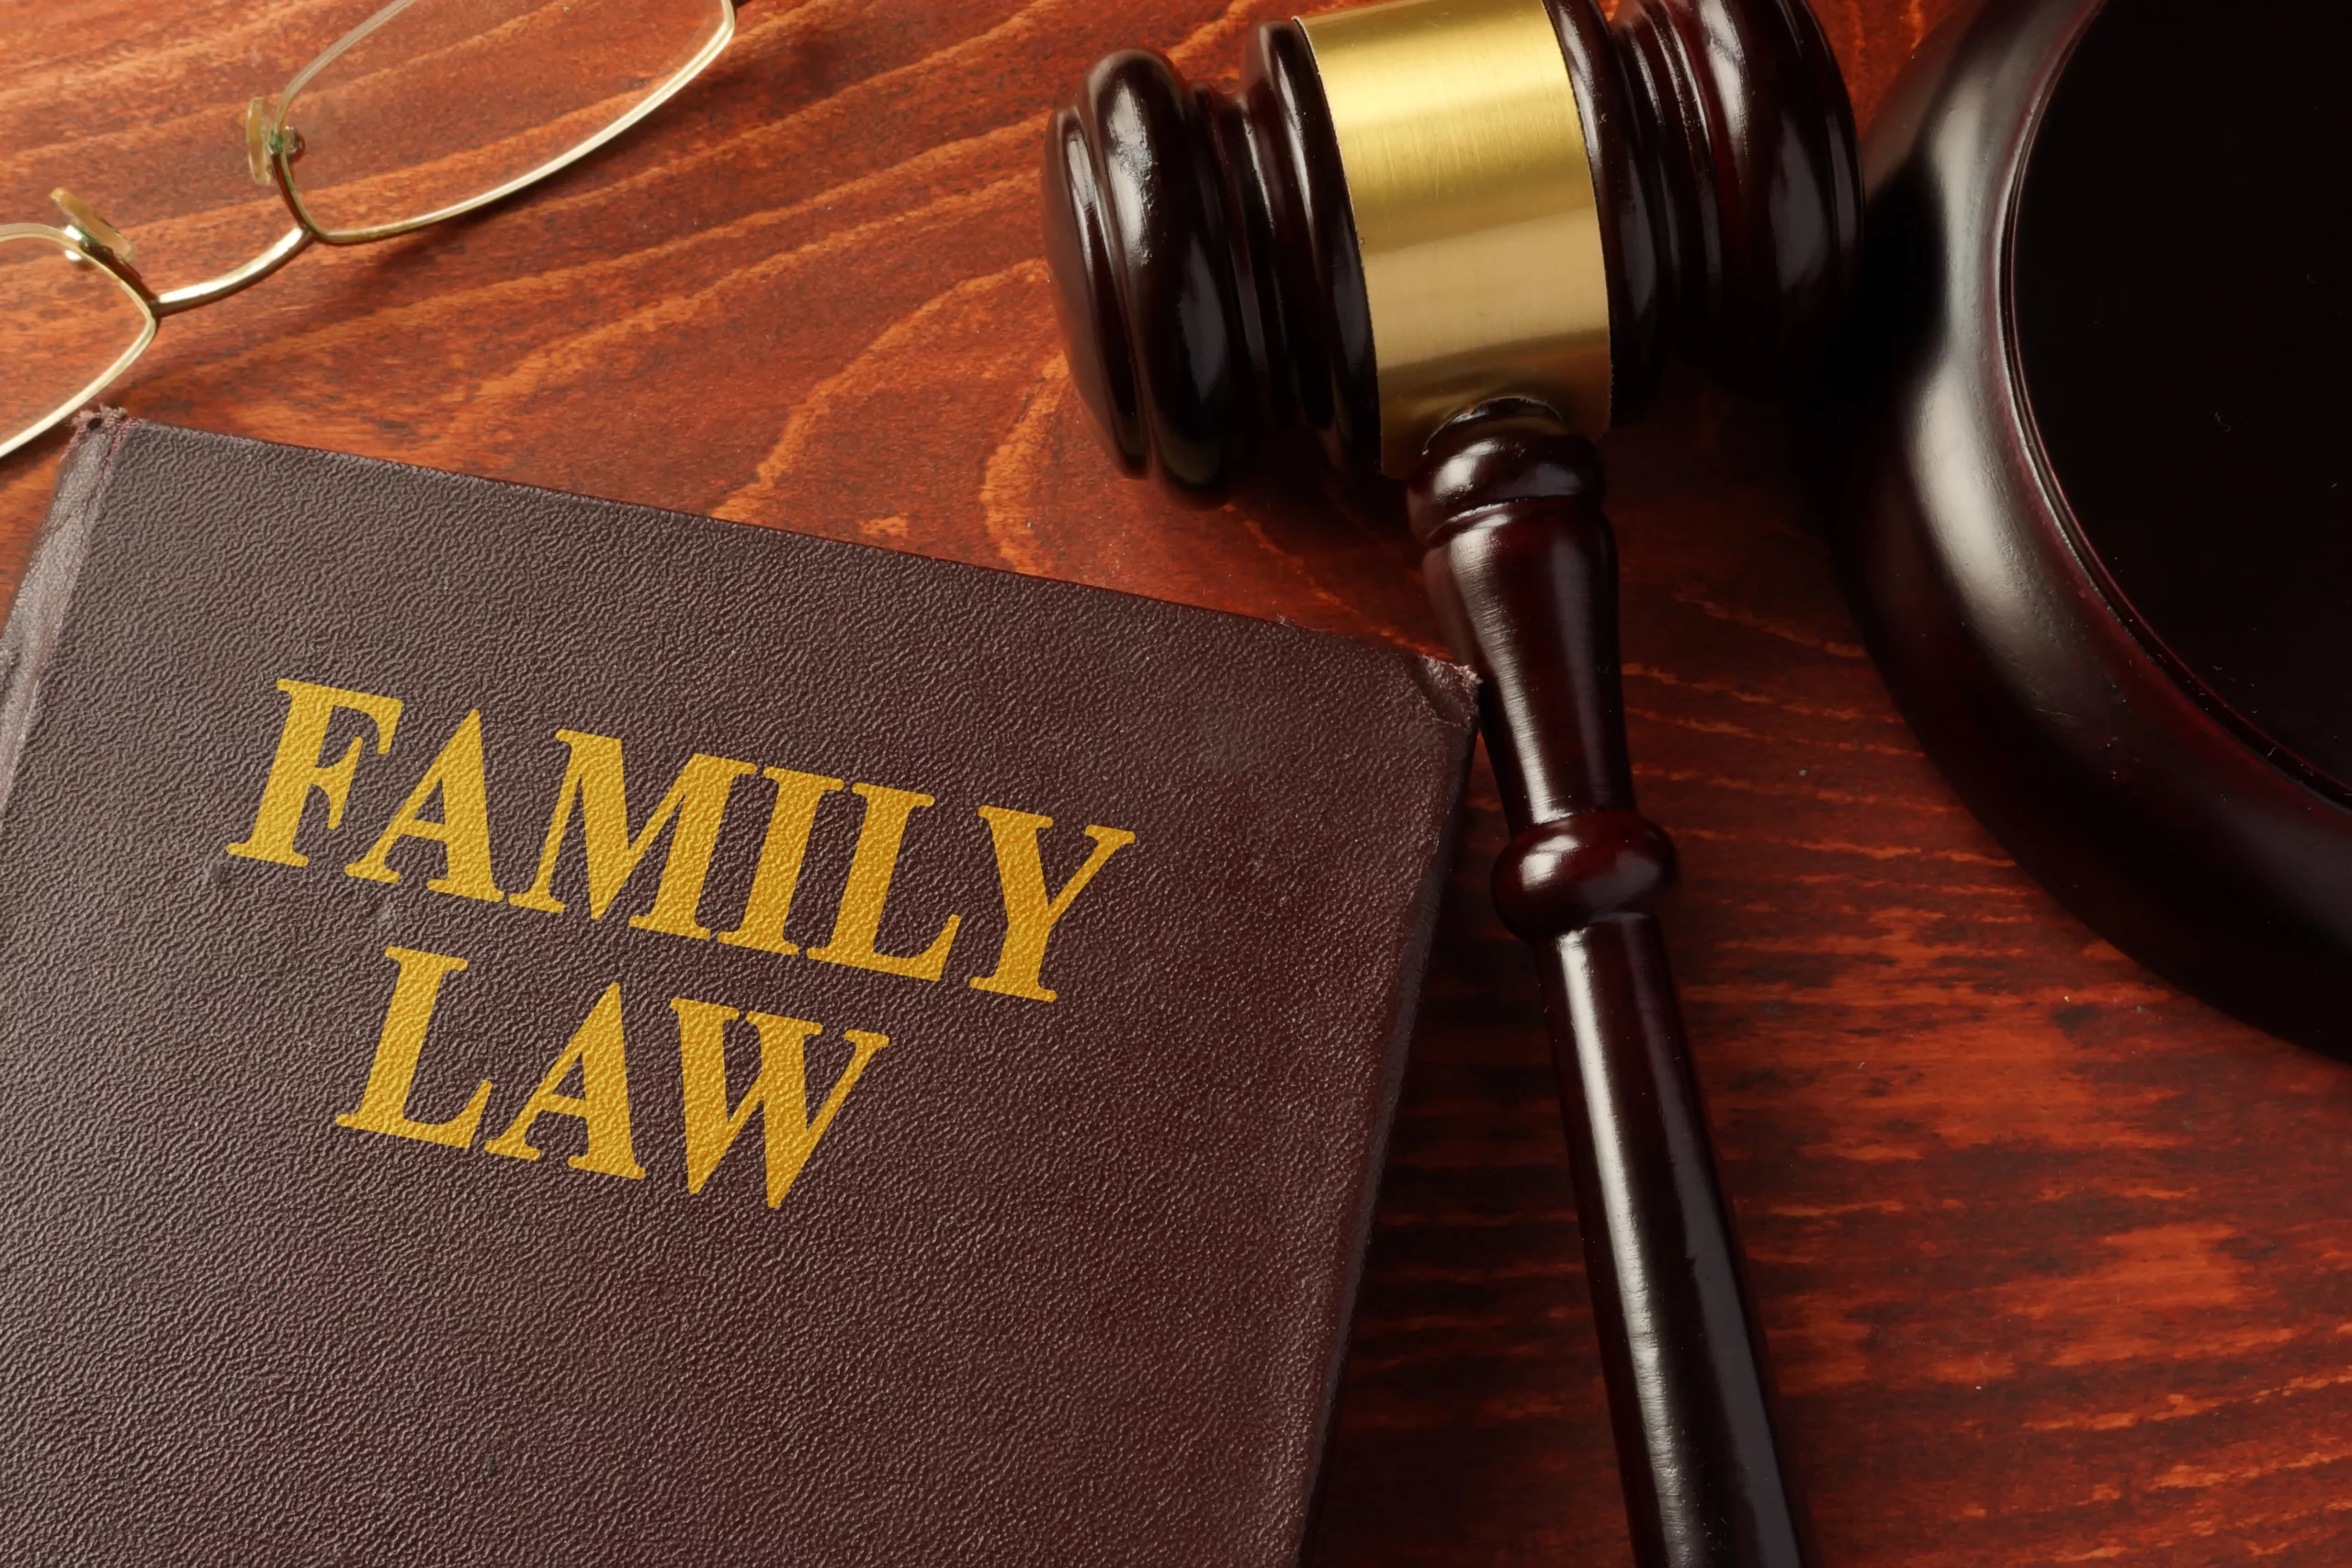 Family Law Practice Directions Book KPA Lawyers